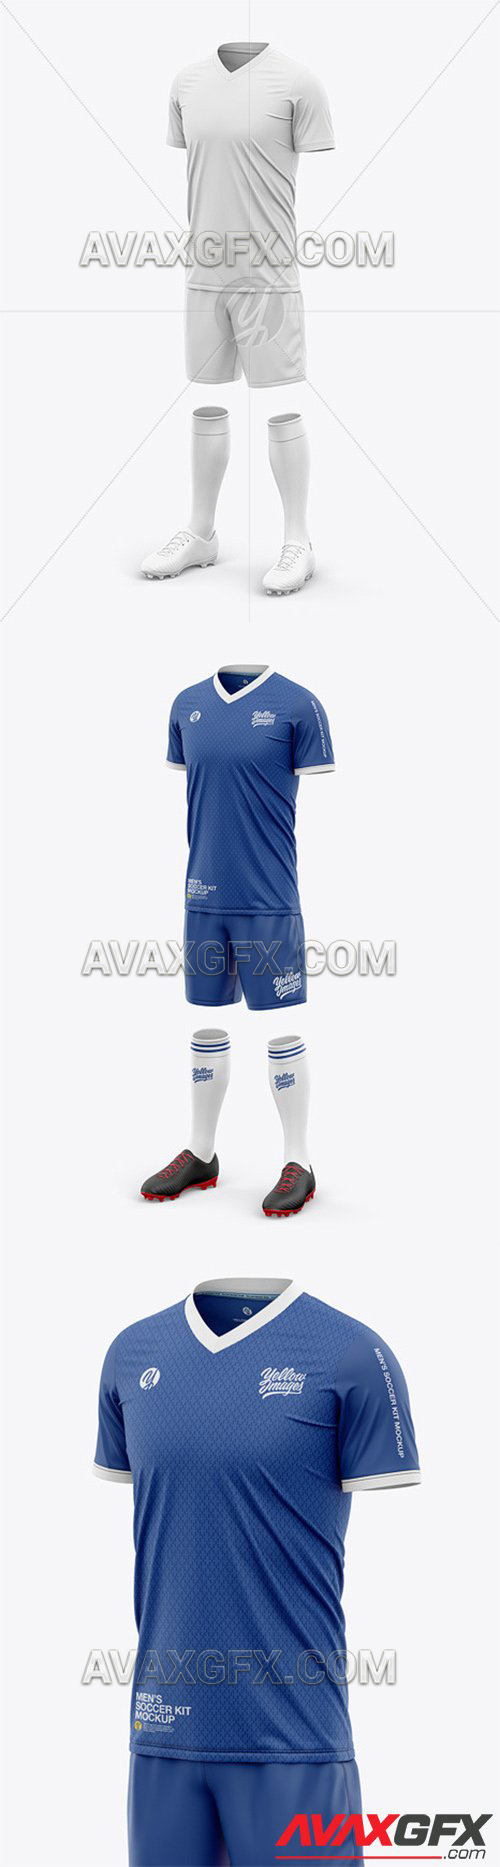 Download Men's Full Soccer Kit with V-Neck Jersey Mockup - Front Half-Side View 57533 » AVAXGFX - All ...